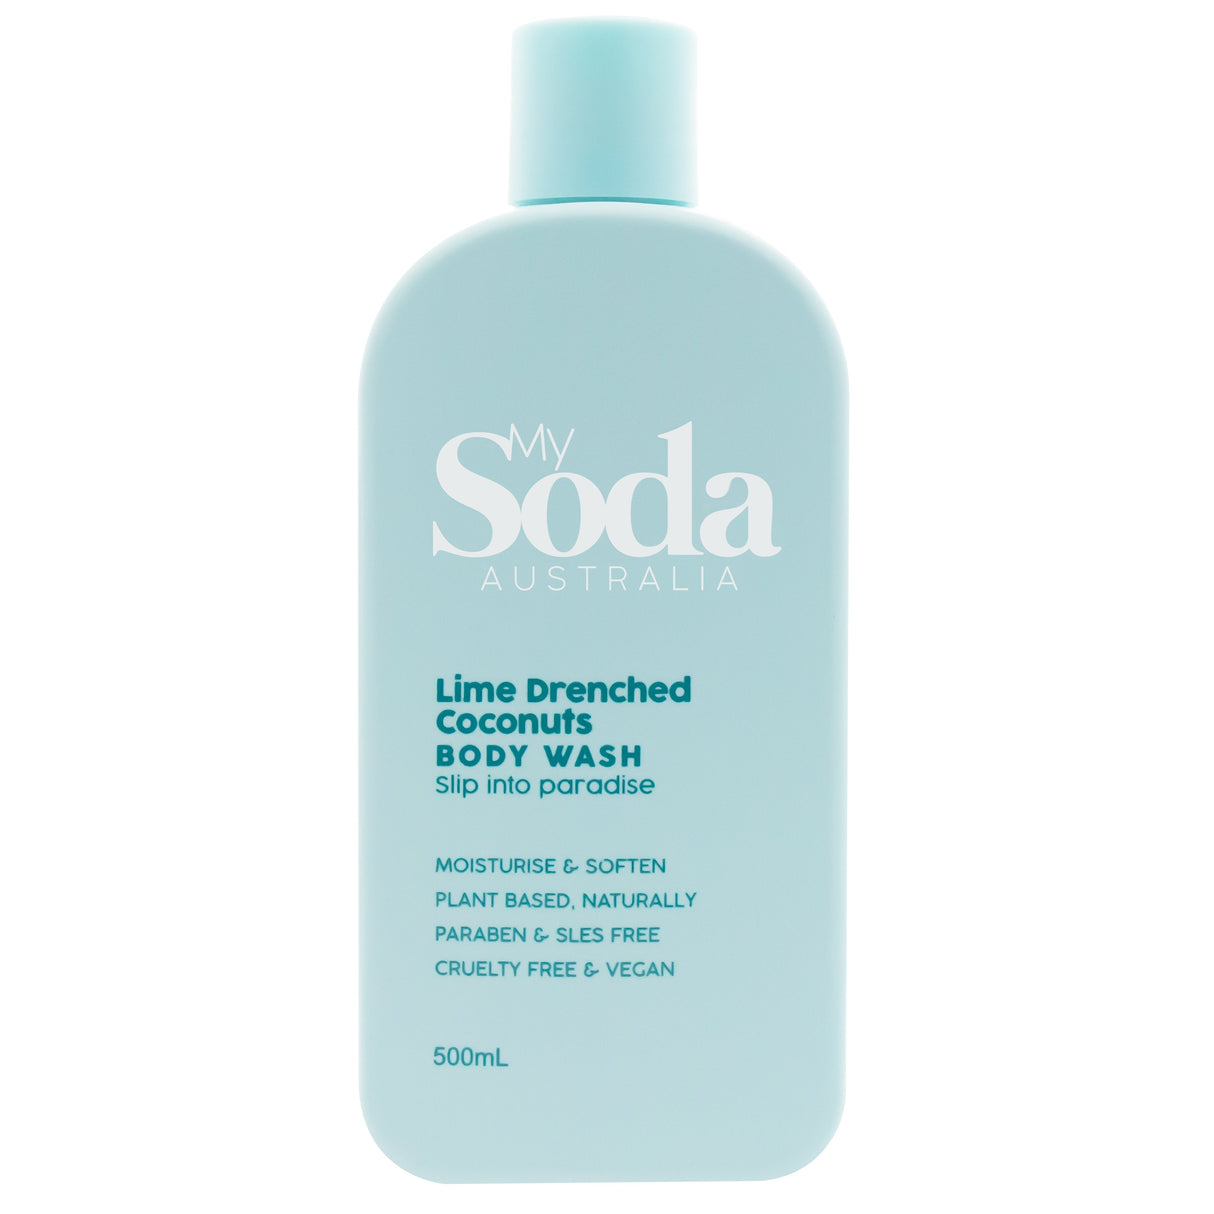 My Soda Lime Drenched Coconuts Body Wash 500ml